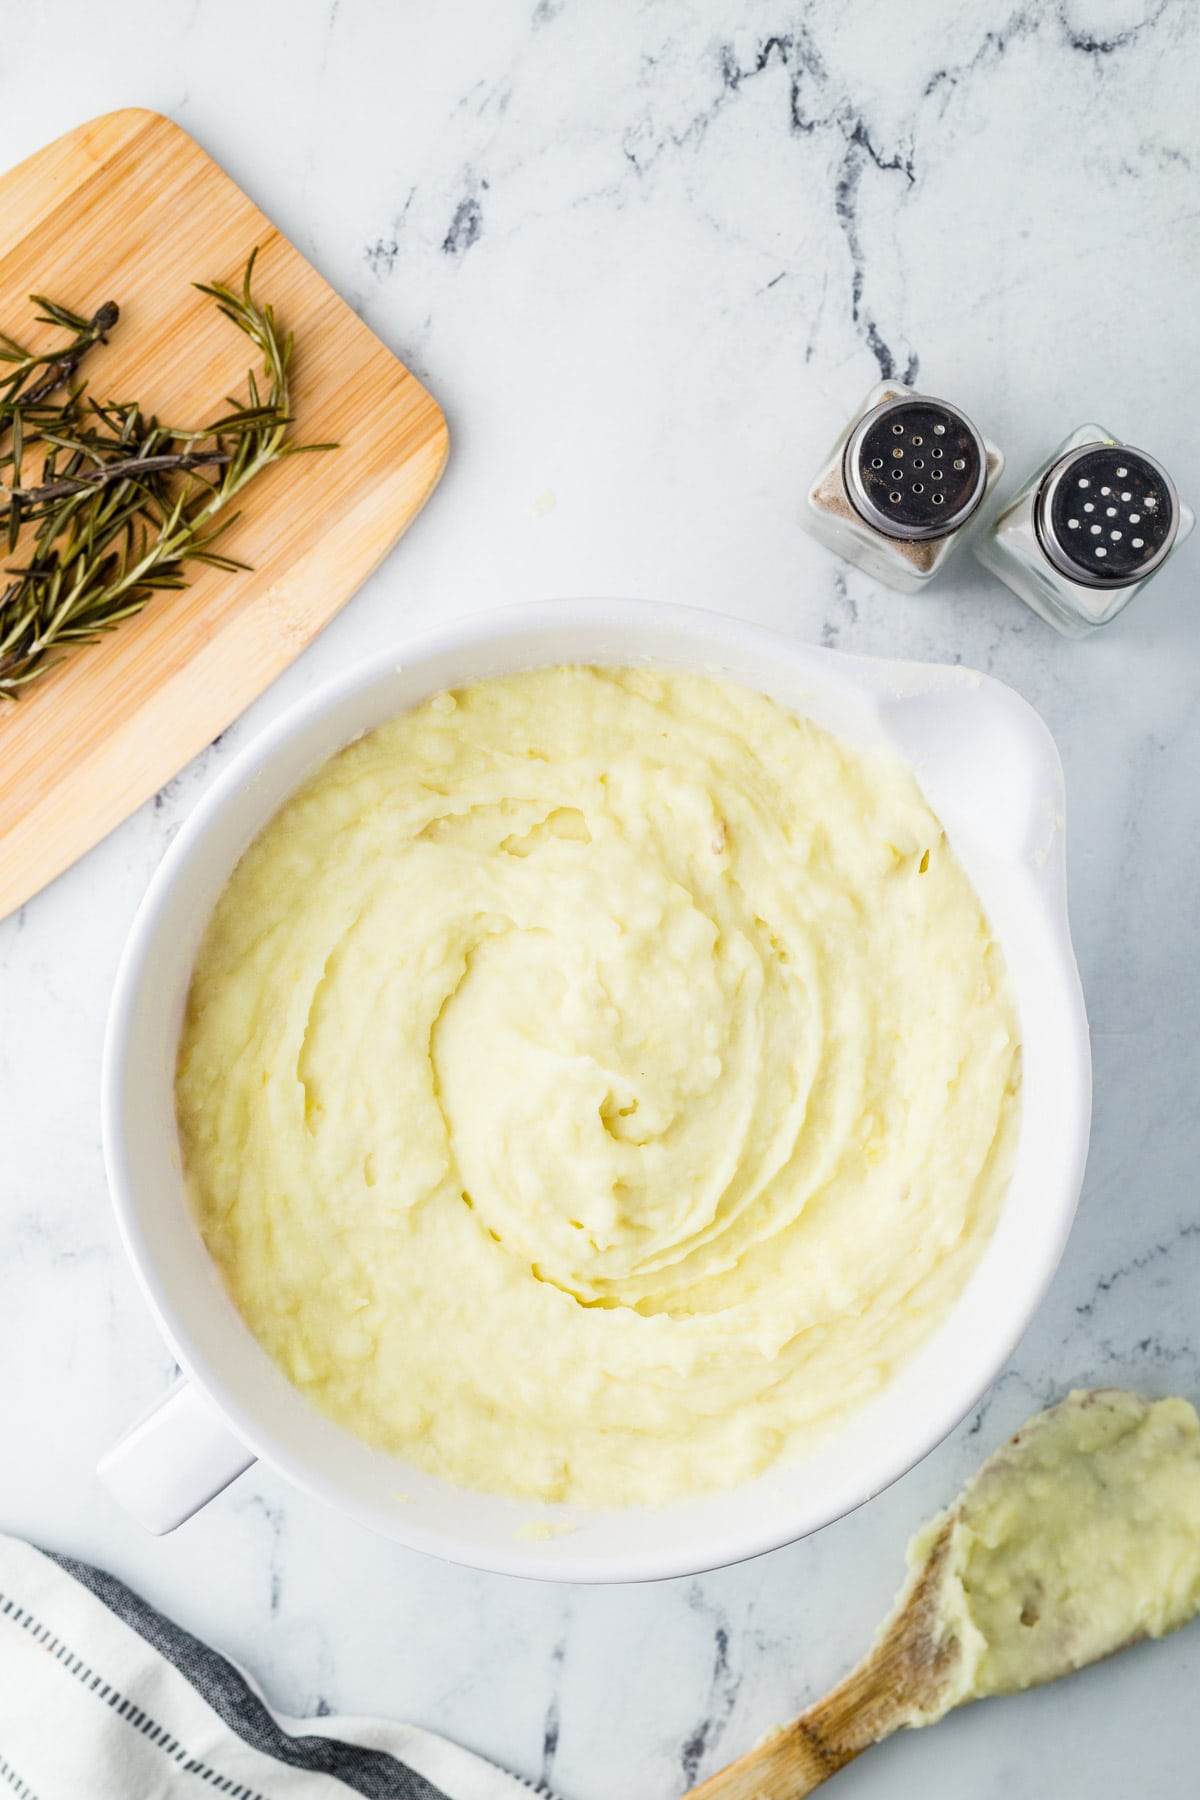 Mashed potatoes in a white bowl with sprigs of rosemary.